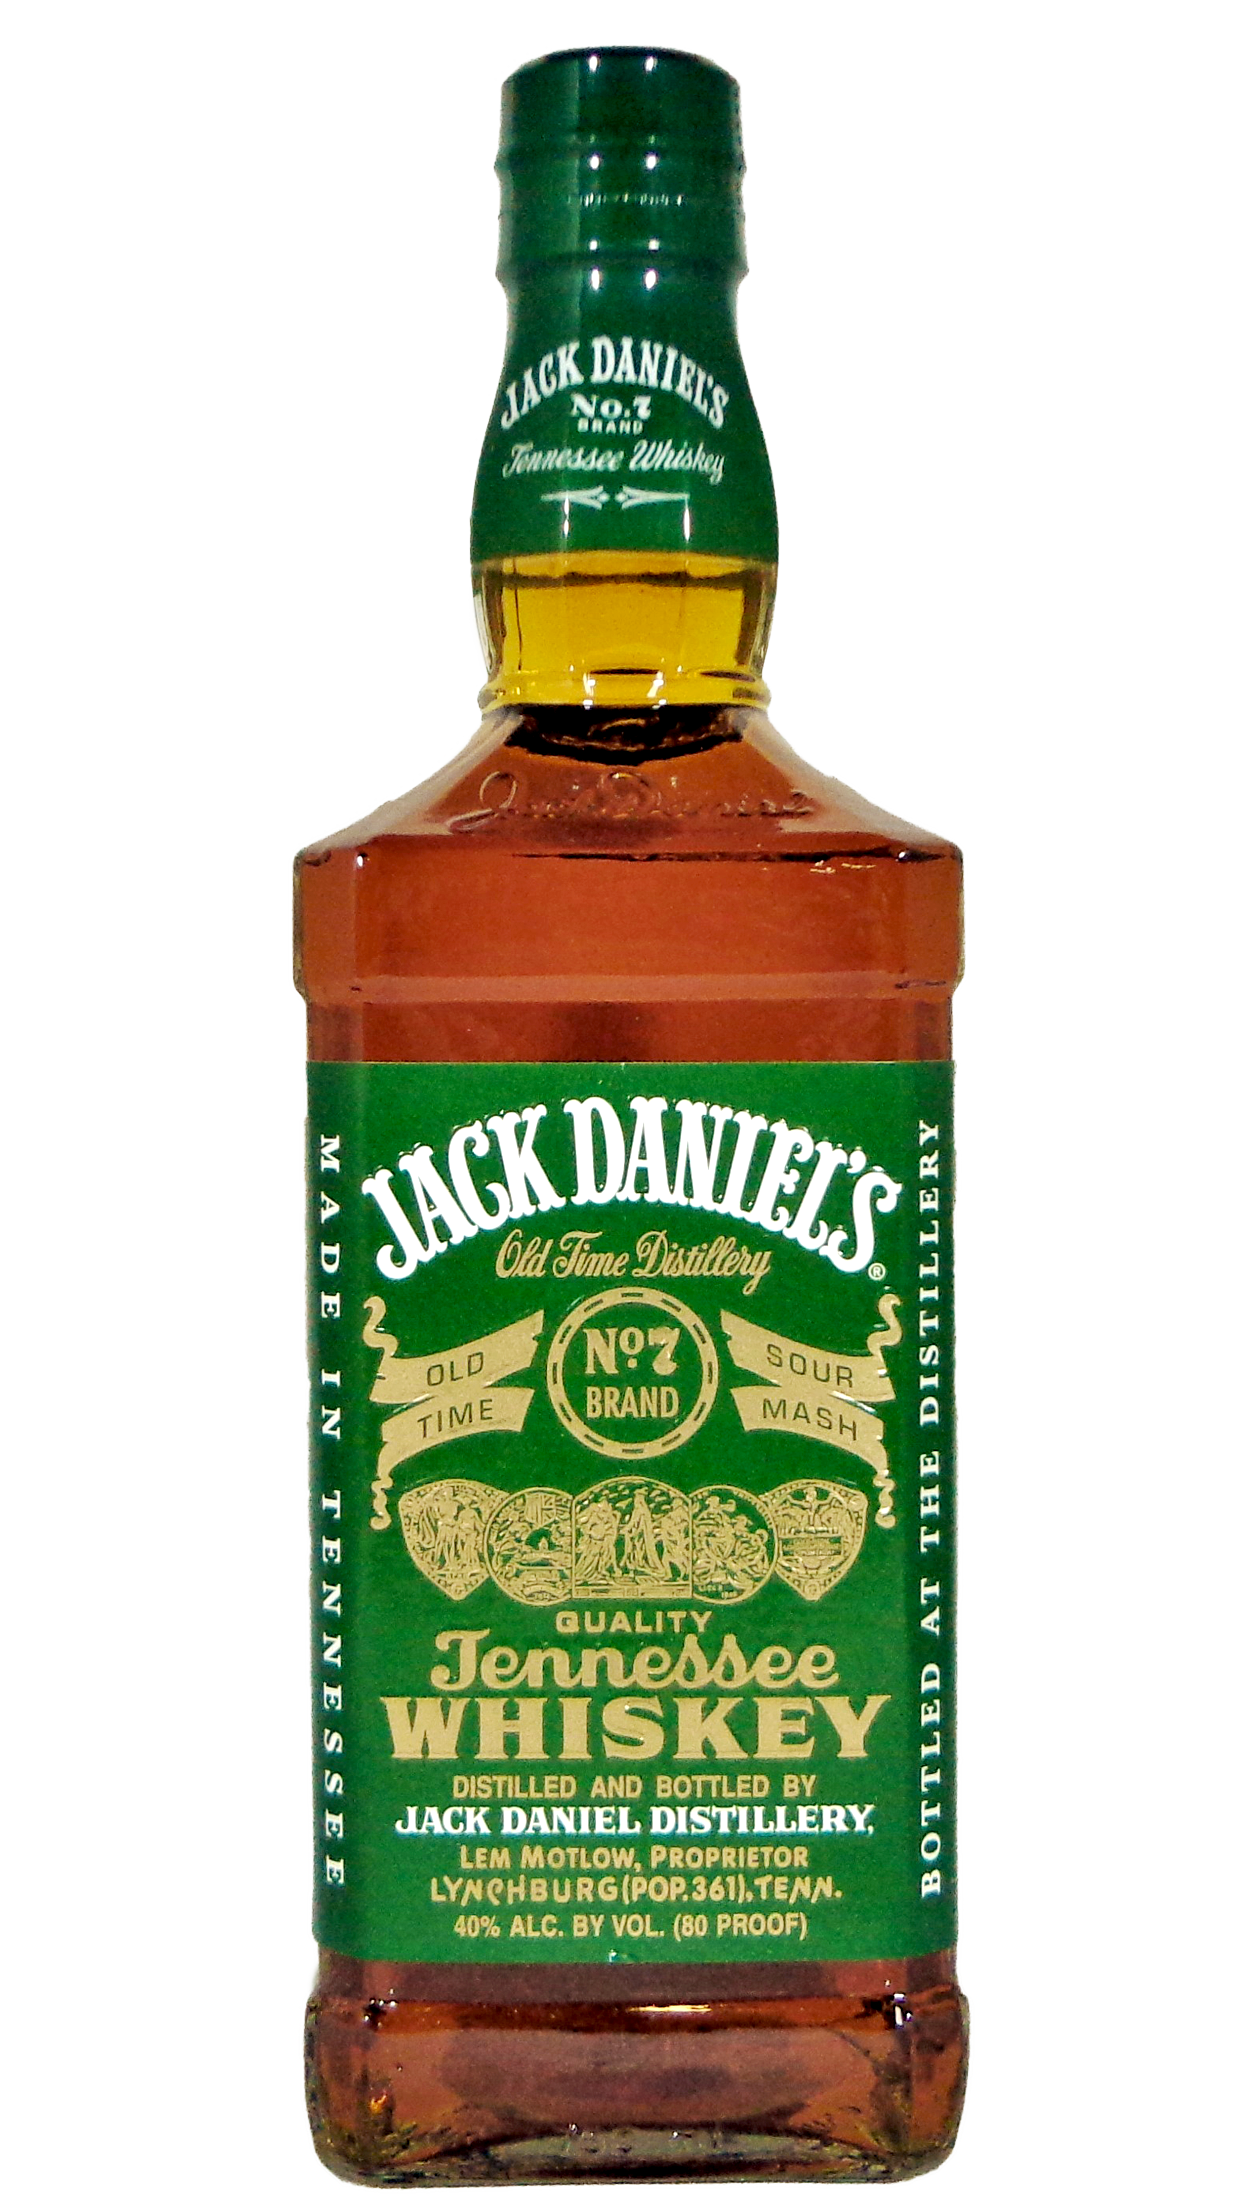 BUY] Jack Daniel\'s Old No. 7 Green Label Sour Mash Tennessee Whiskey at